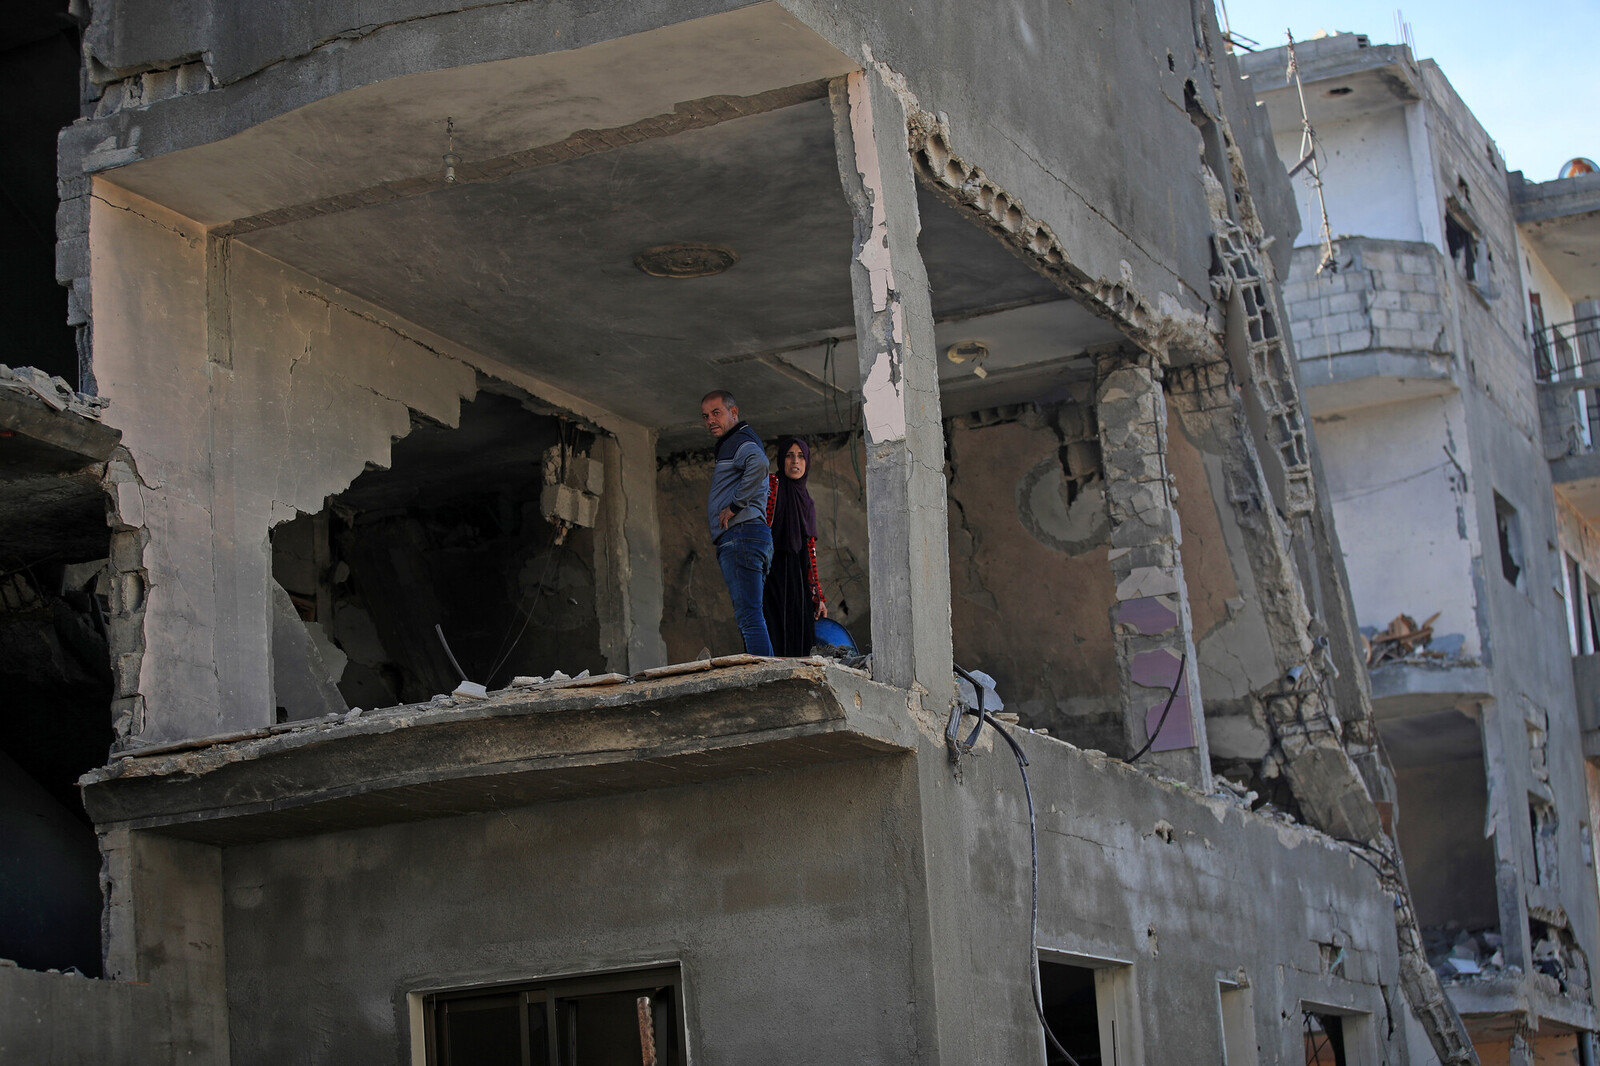 Man and woman stand in a bombed out building